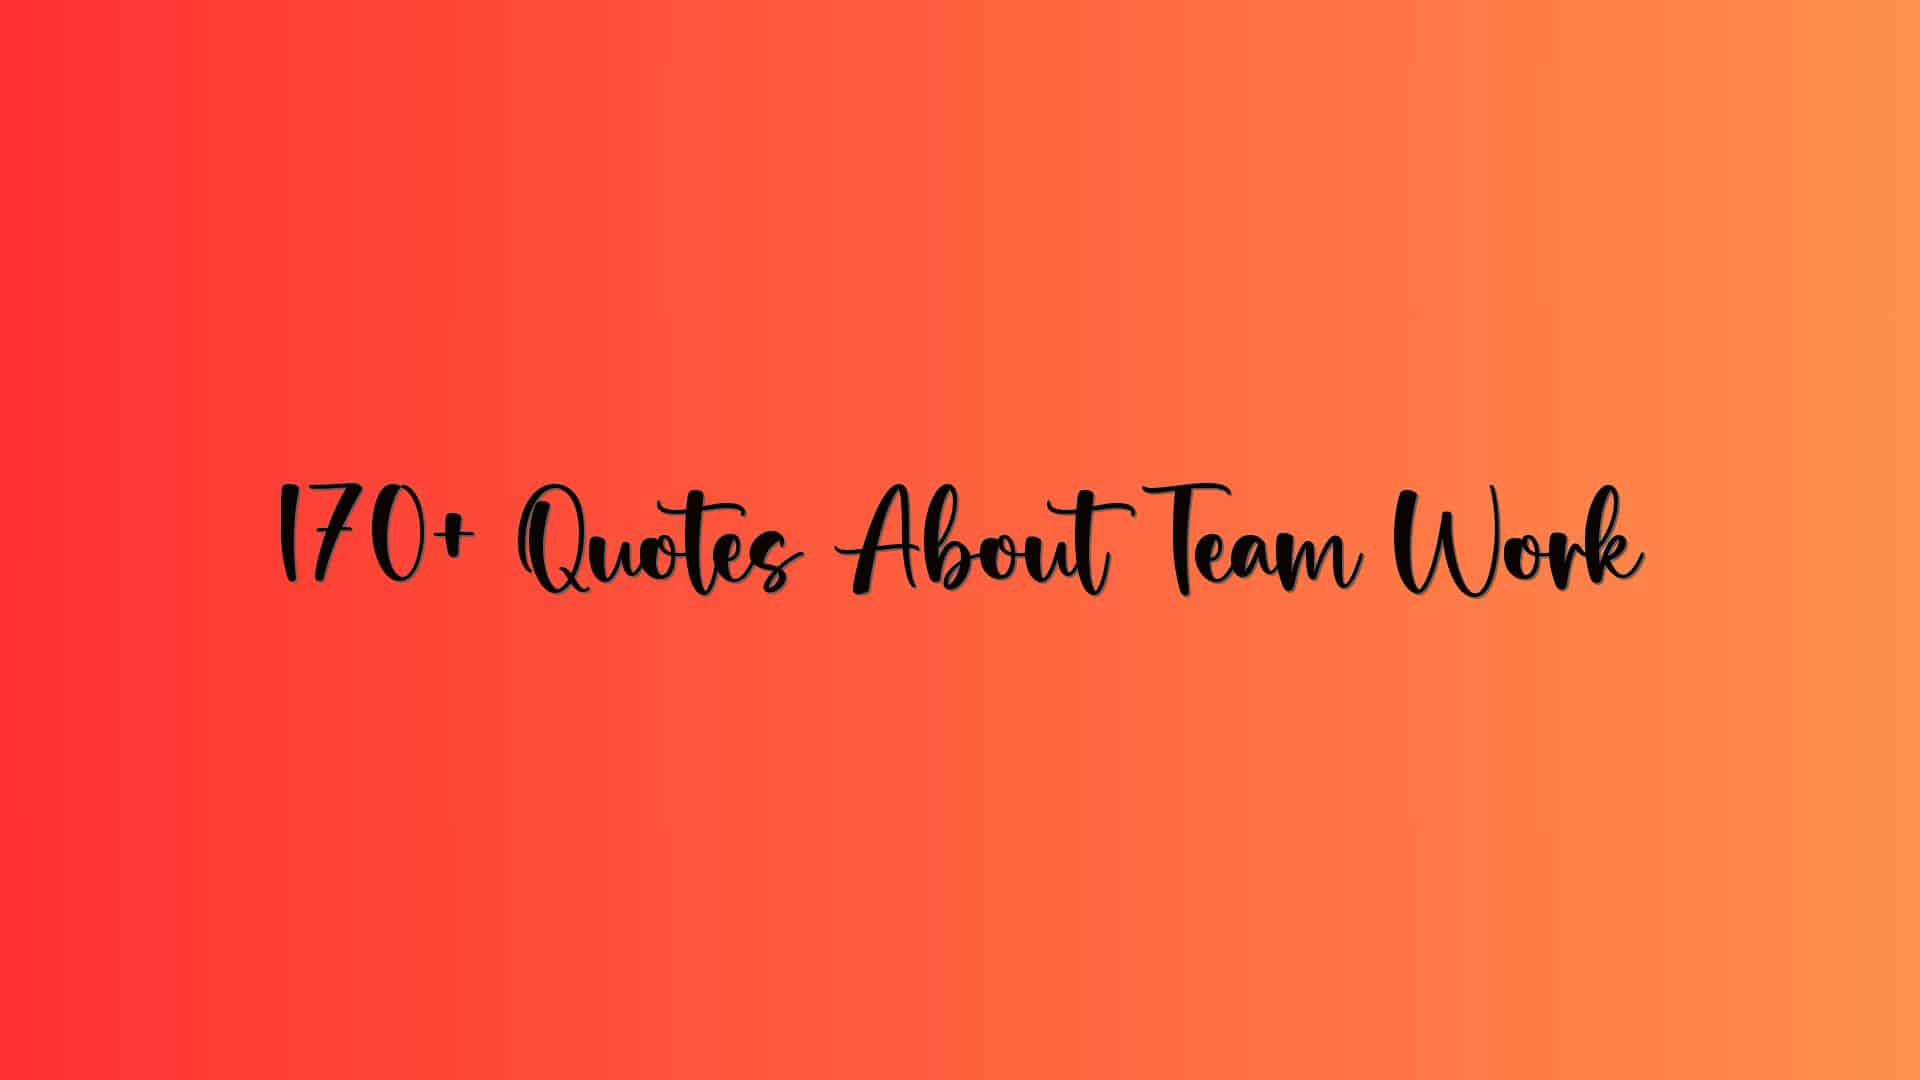 170+ Quotes About Team Work